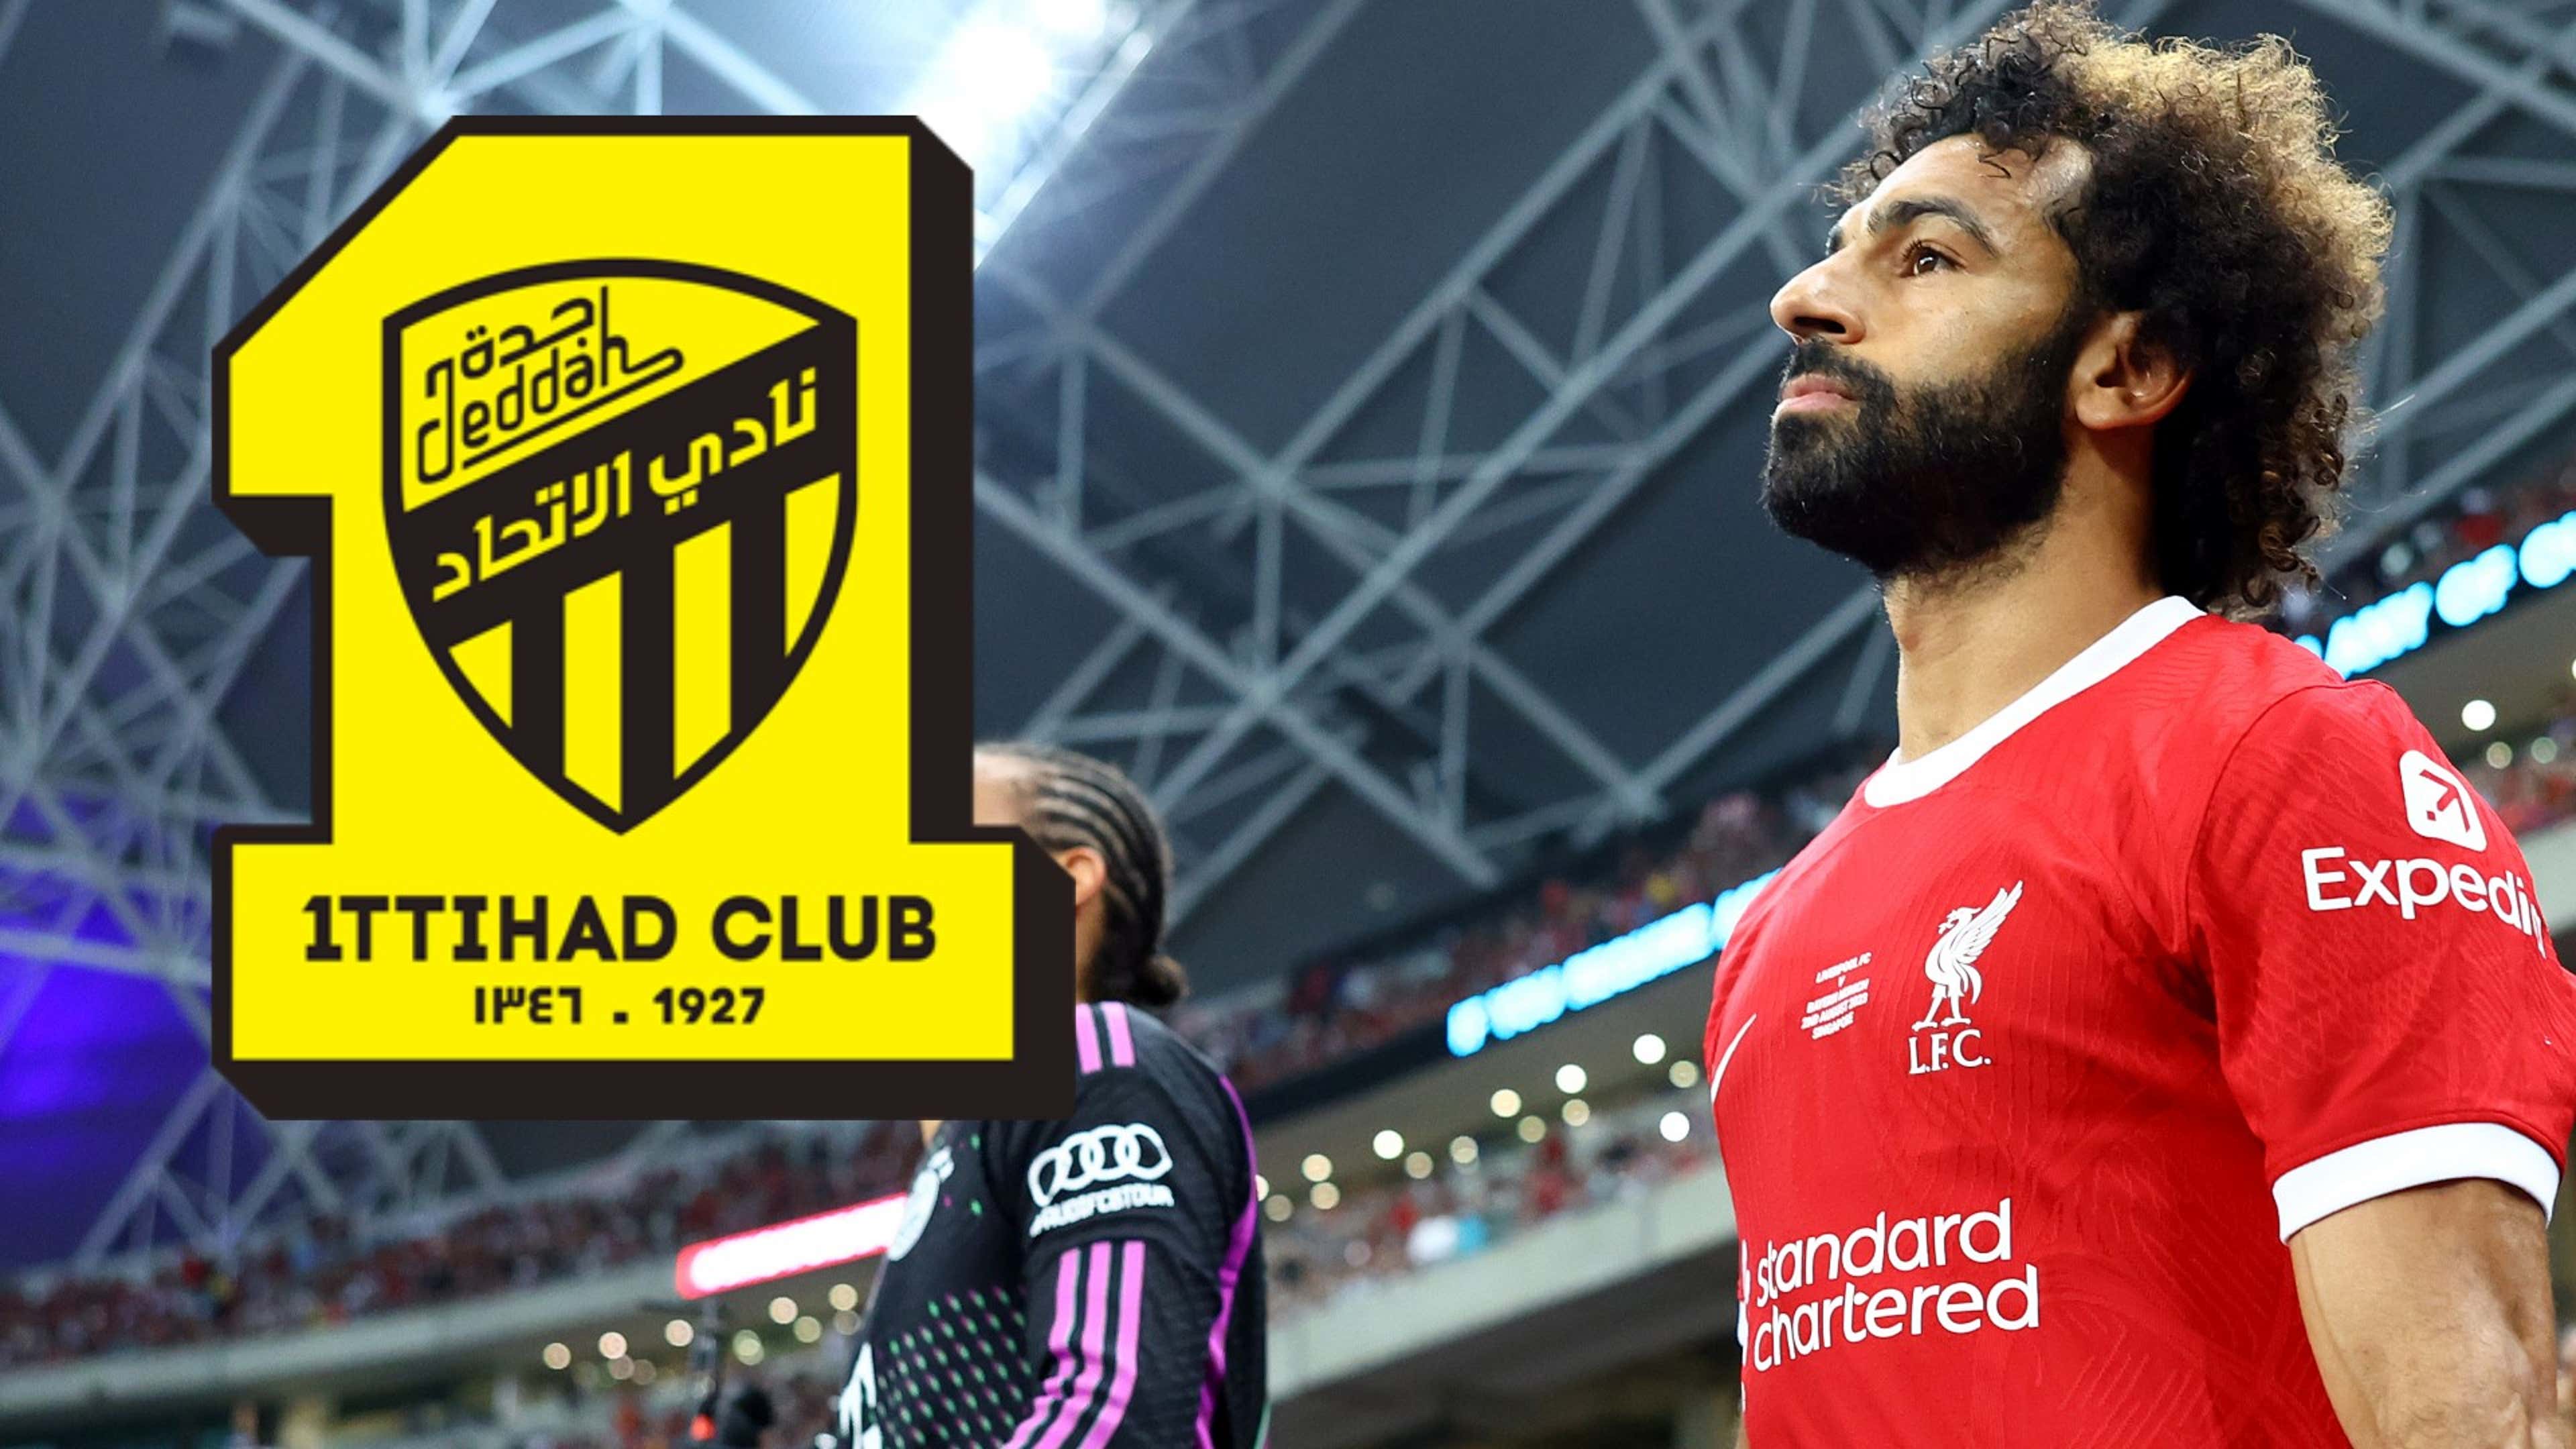 Where does the Saudi Pro League rank in world football? Player Ratings  revealed